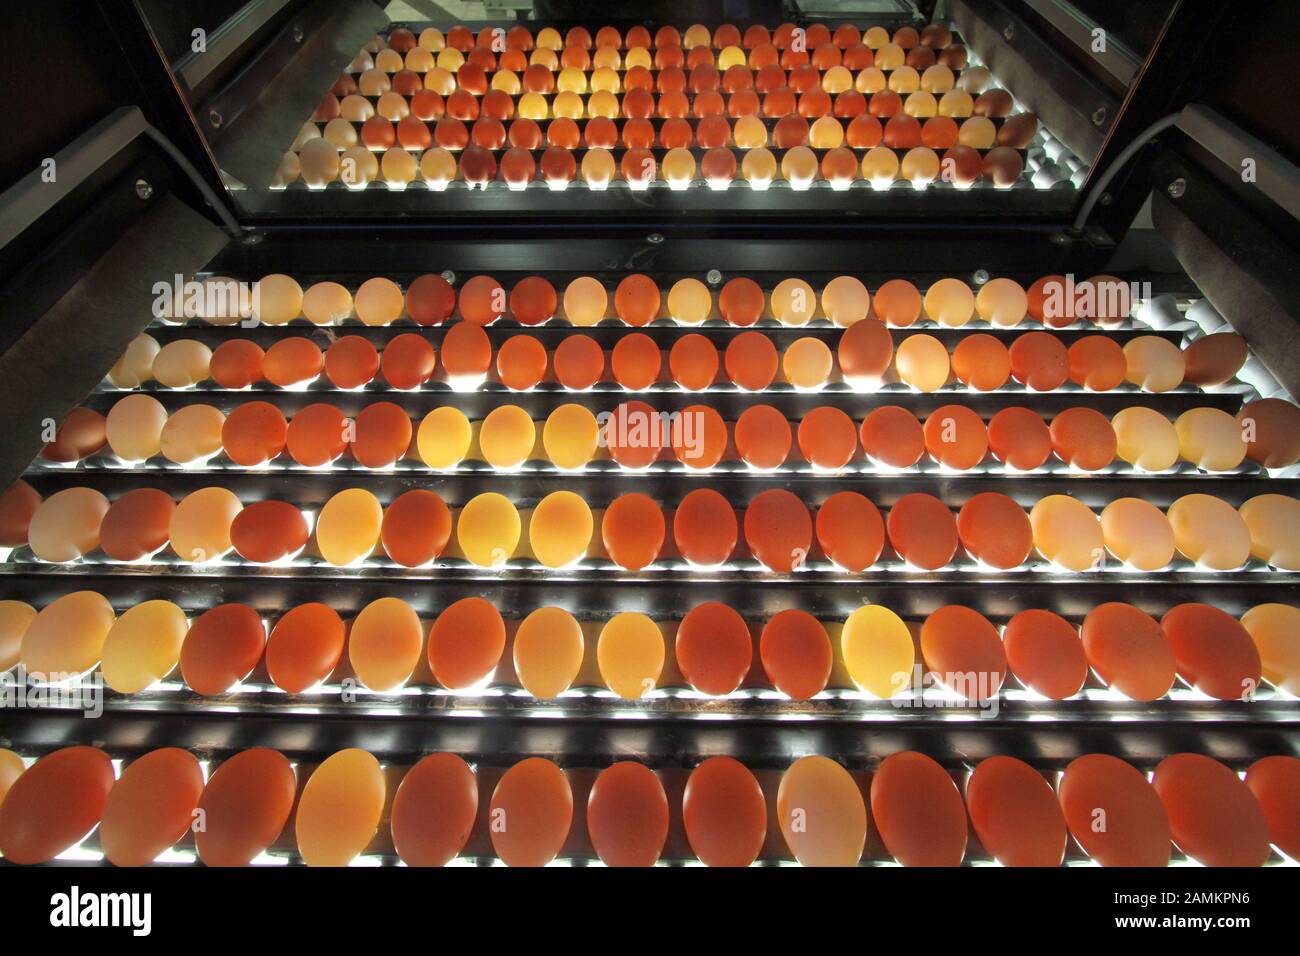 Mechanical egg sorting on the Bentenrieder Hof of Matthias Wackerl in Prittlbach near Hebertshausen, a family business with industrial production methods. [automated translation] Stock Photo